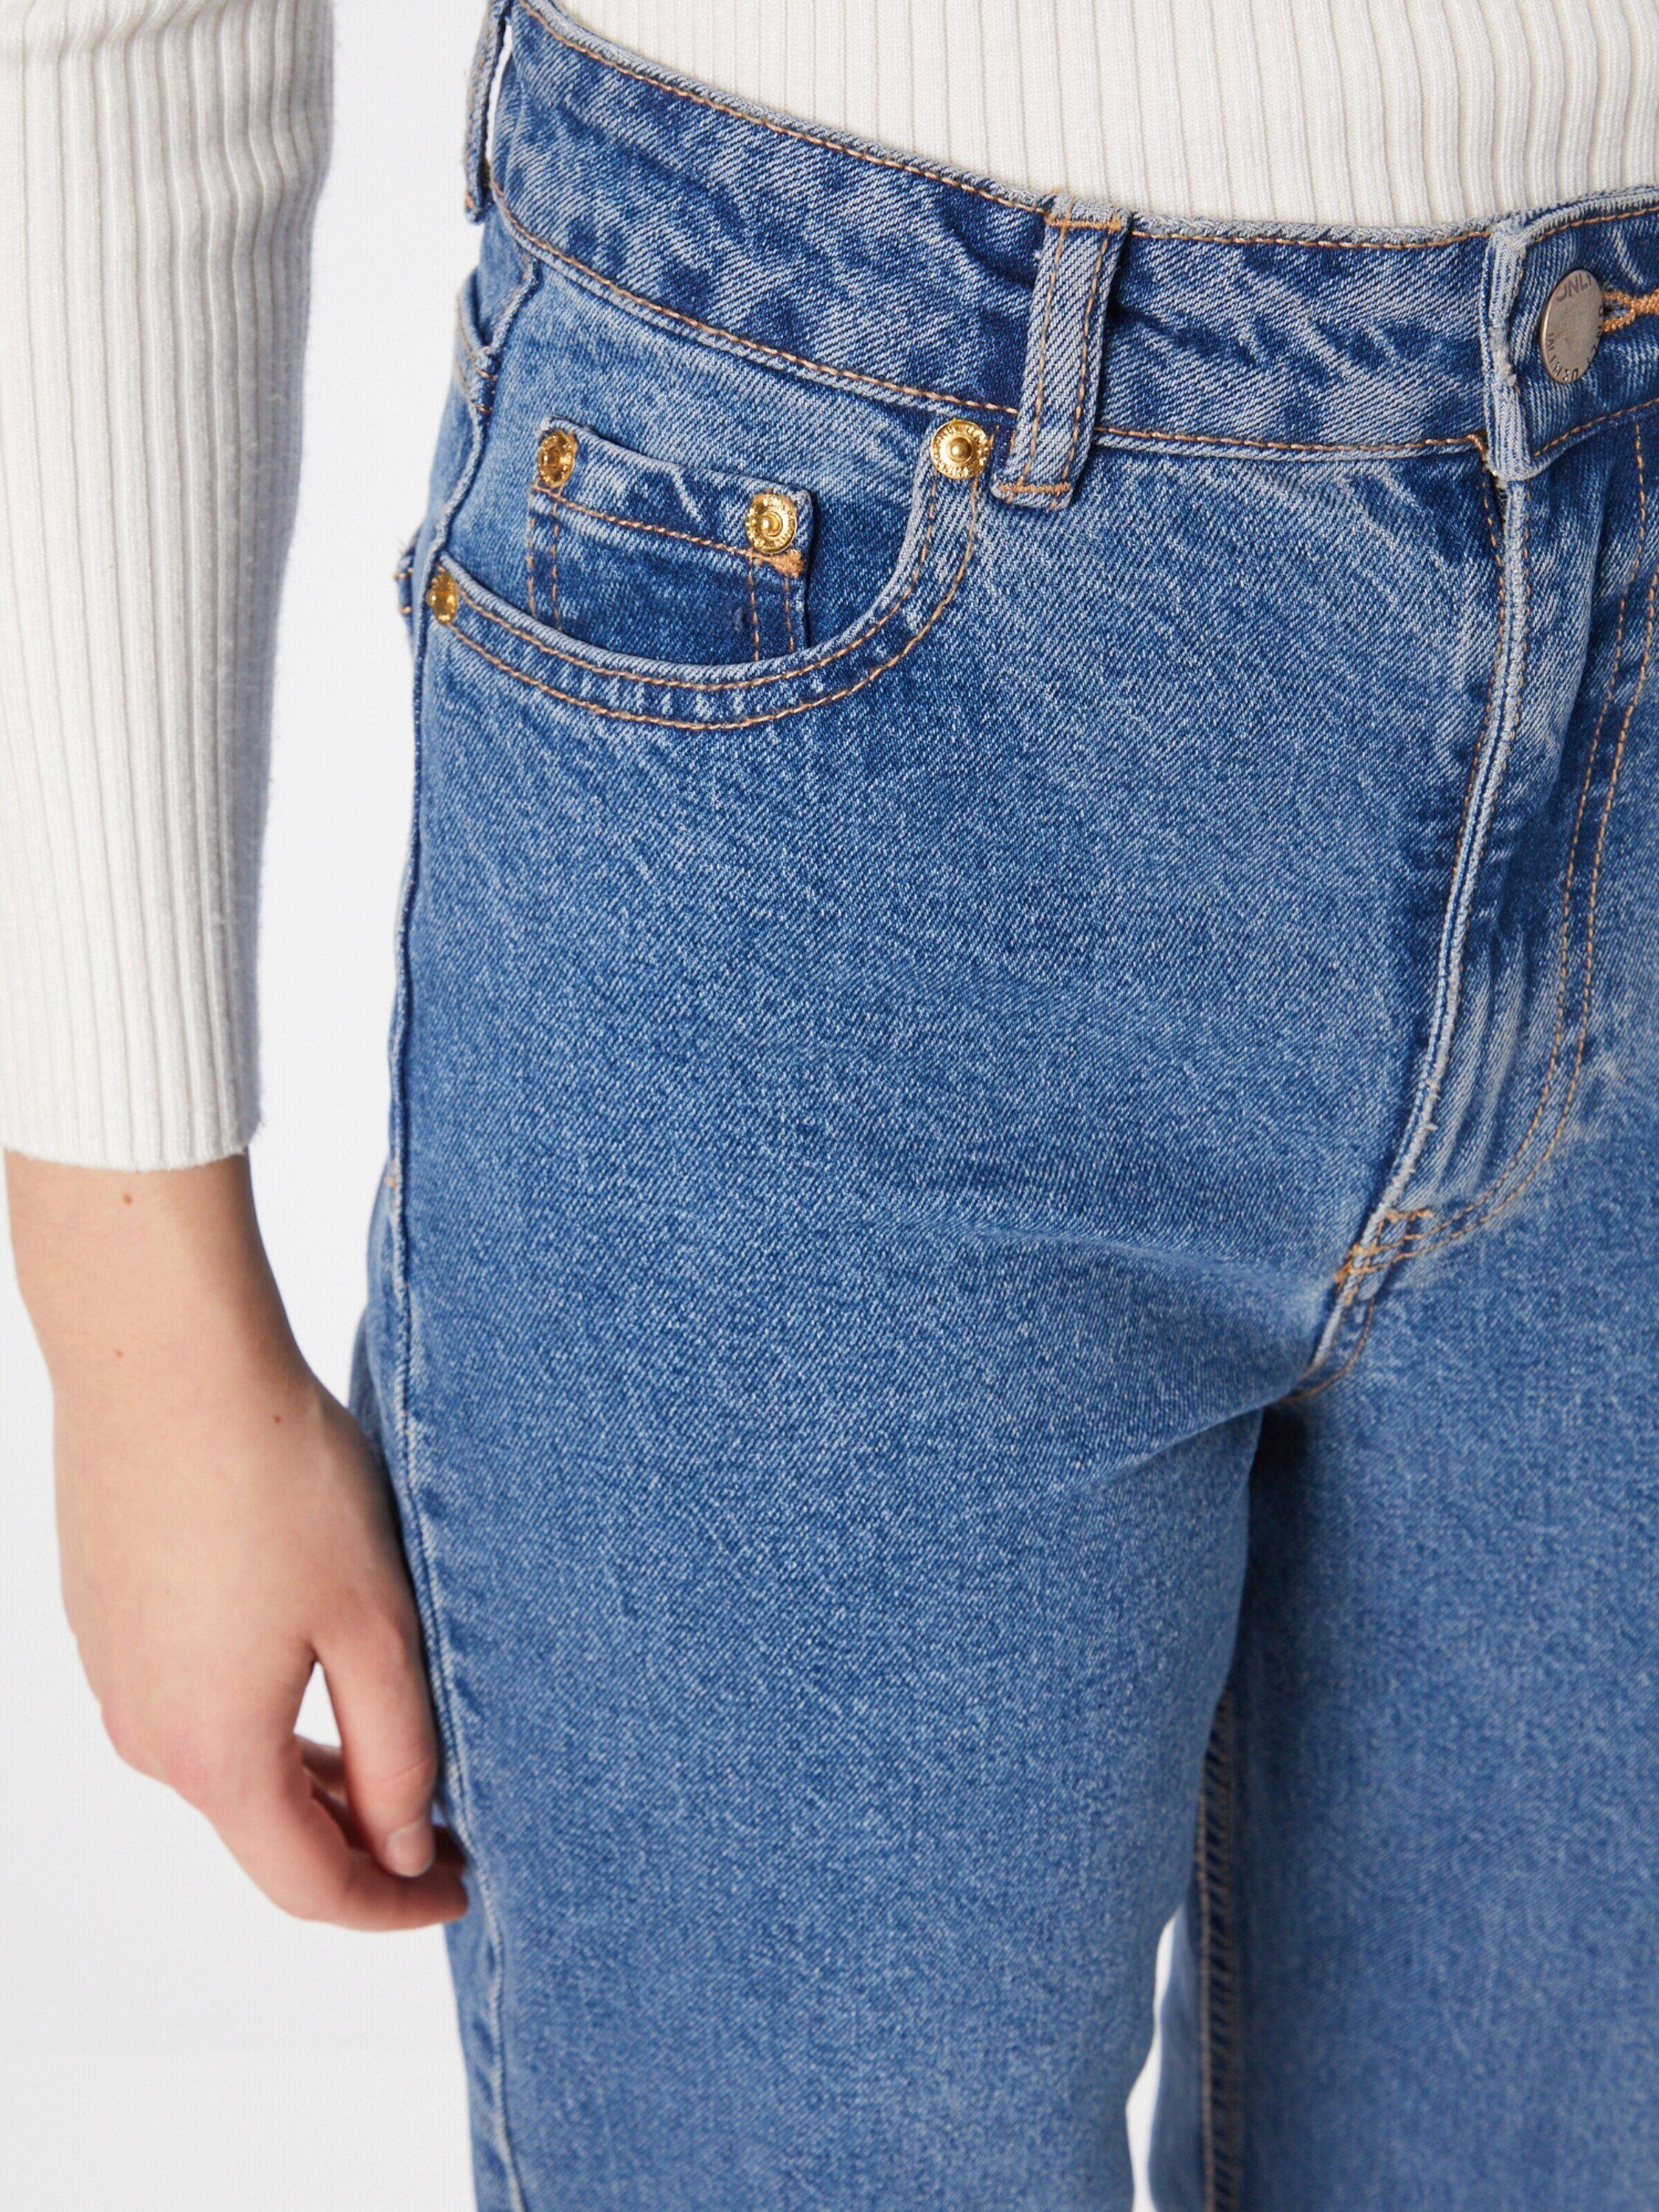 ONLY Weite Jeans Camille Detail Plain/ohne Details, Weiteres (1-tlg)